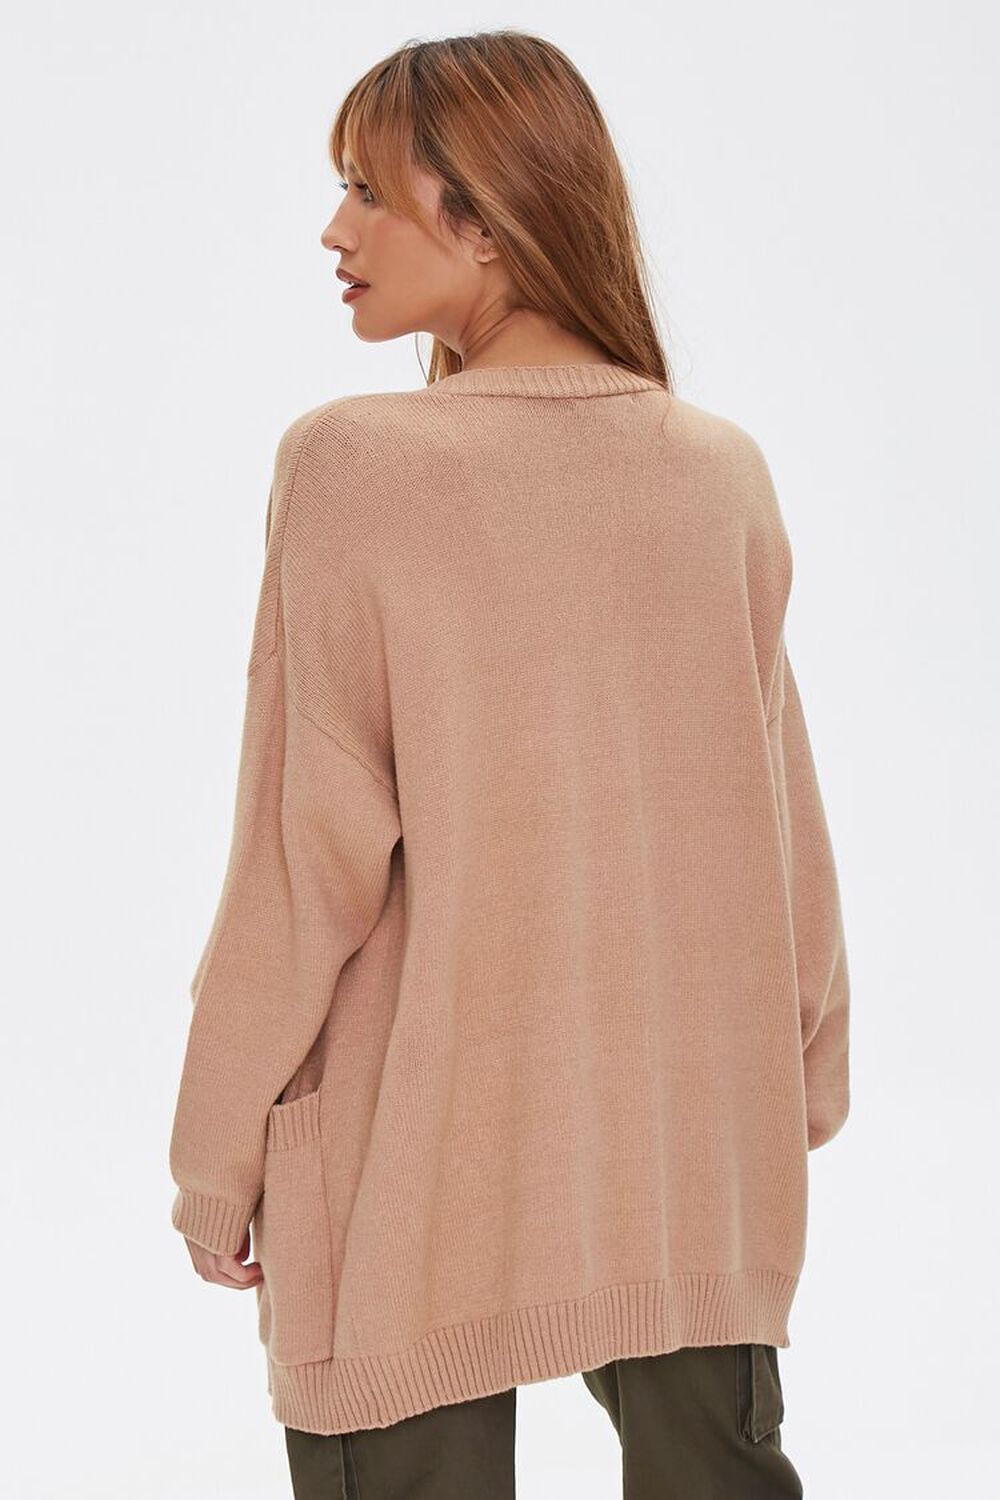 TAUPE Patch-Pocket Cardigan Sweater, image 3